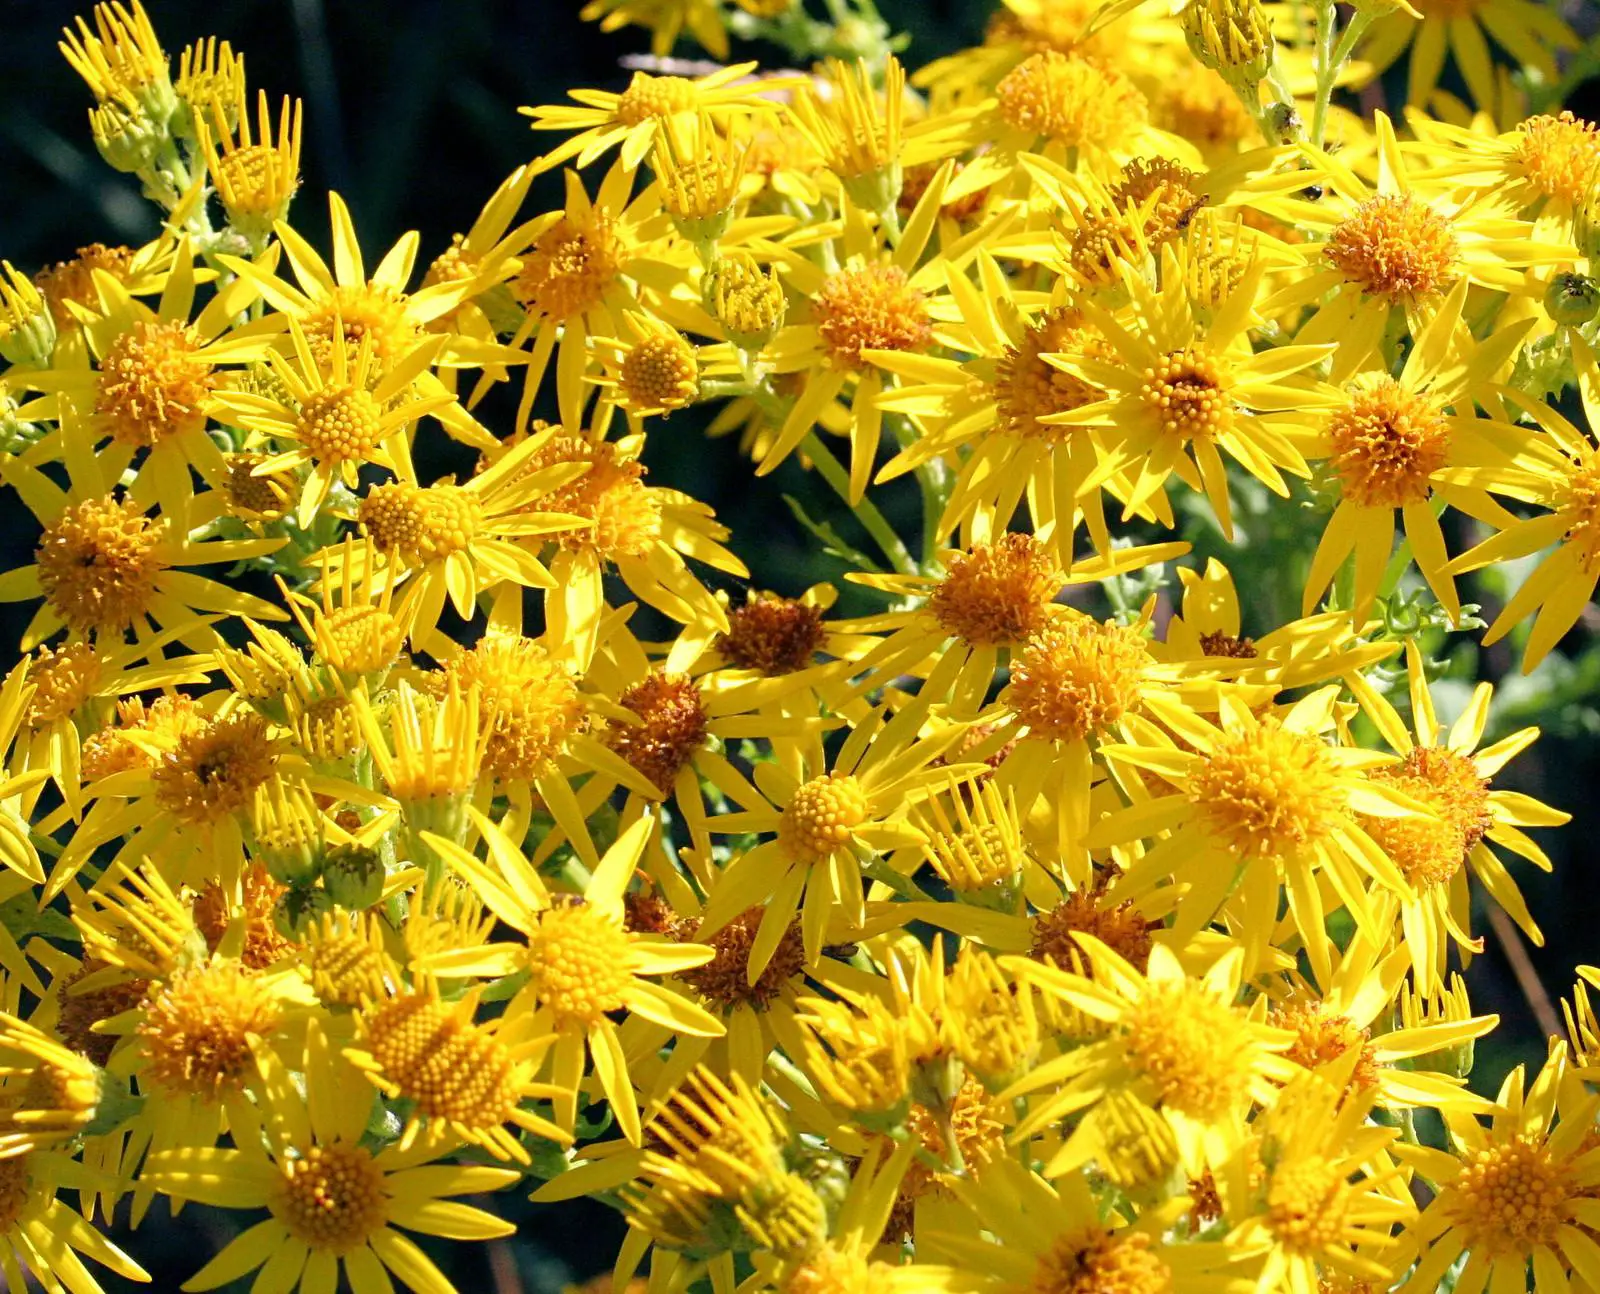 Ragwort flowers cluster and become invasive within an area